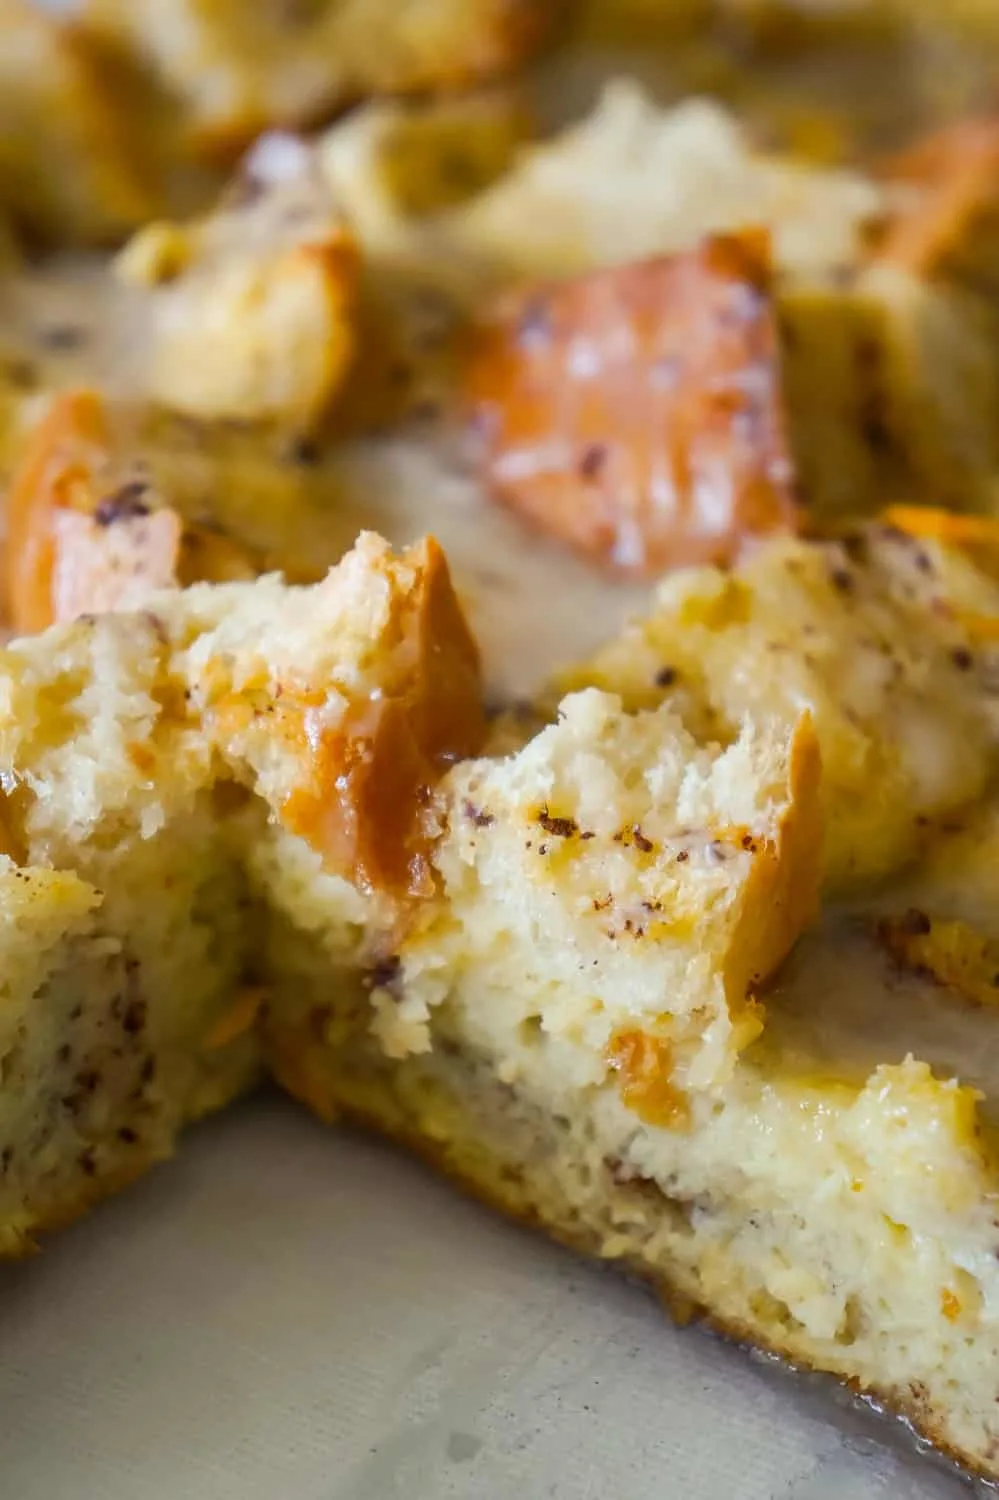 Overnight French Toast Casserole is an easy breakfast casserole recipe made with crusty French bread soaked in an egg mixture flavoured with ground cinnamon, fresh squeezed orange juice and orange zest.